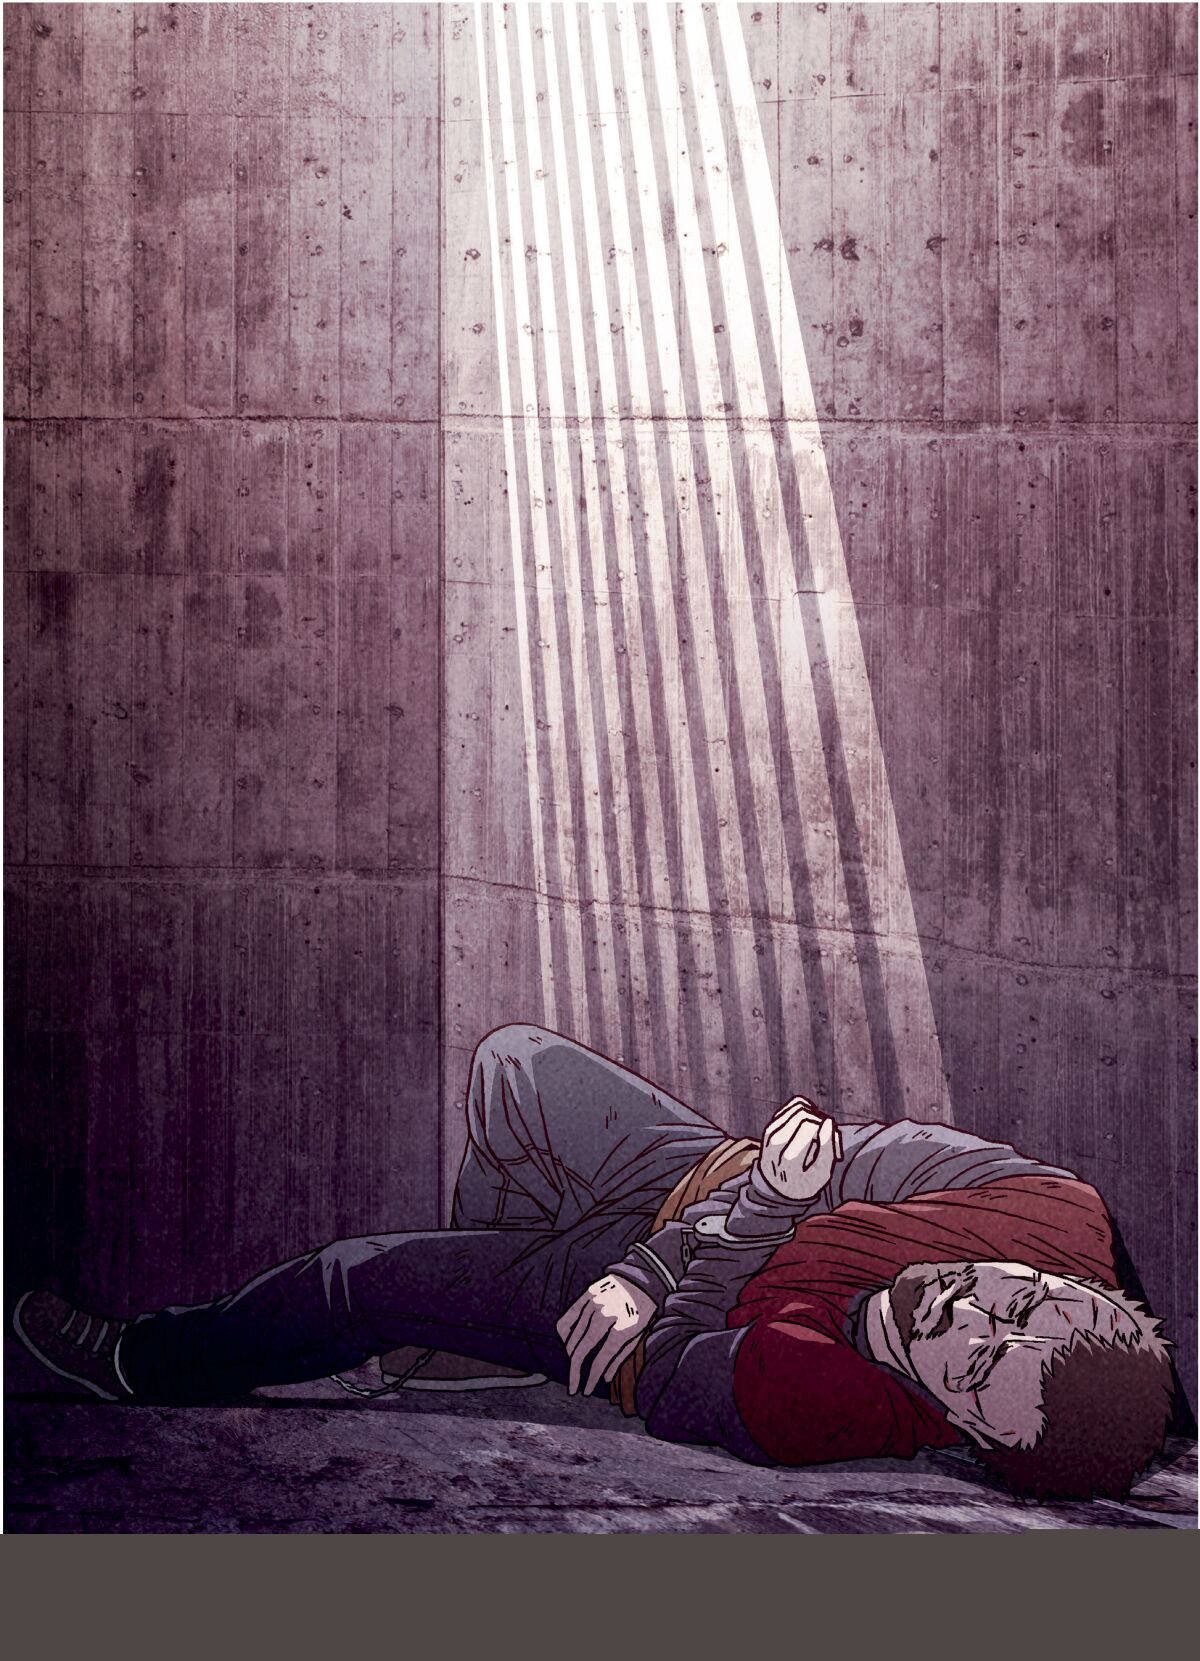 A sketch of a man laying on the floor of a cell in a slant of light.